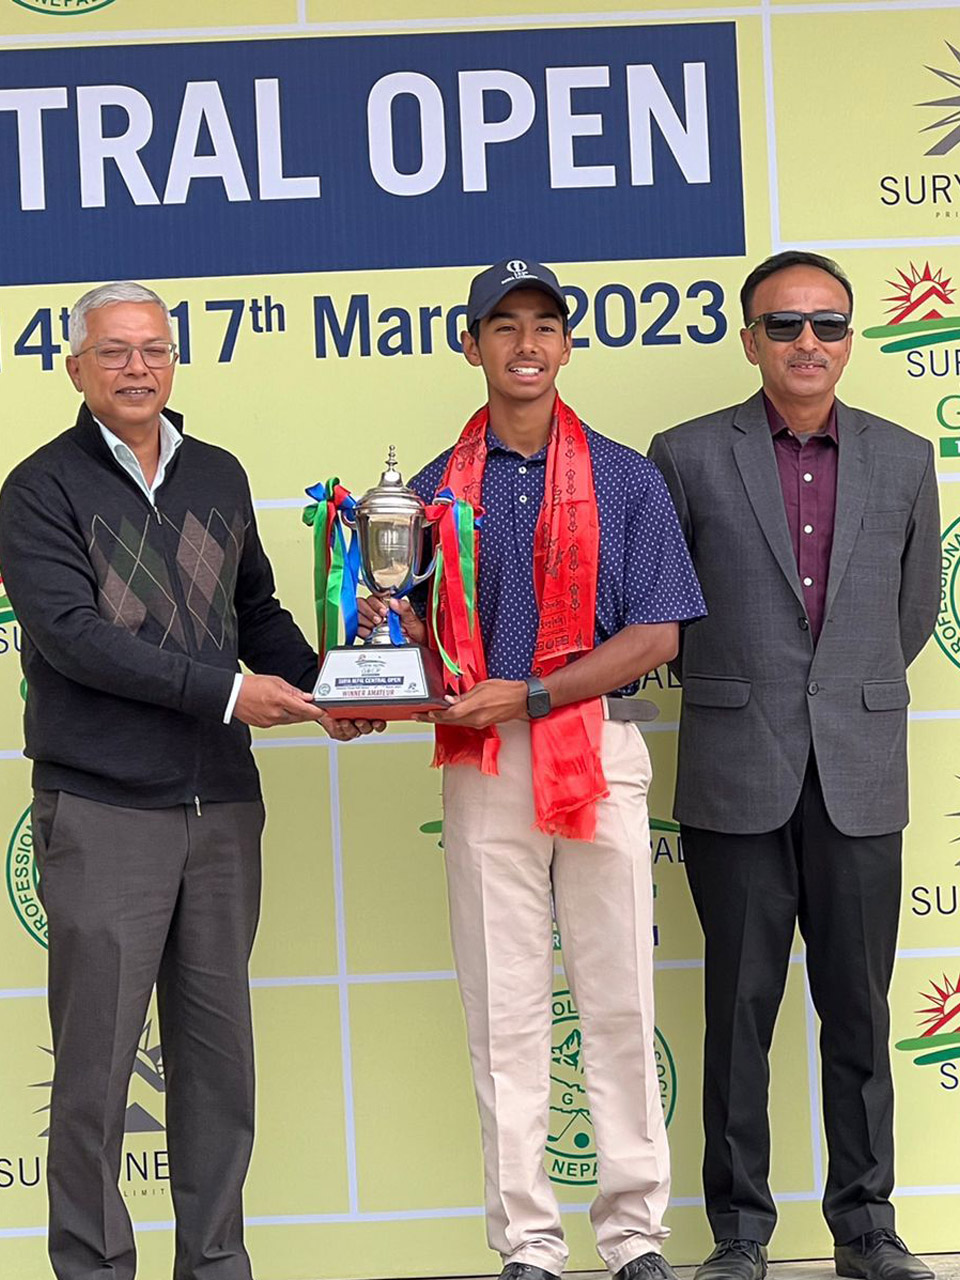 Sadbhav Acharya wins the Amateur Section at Surya Nepal Central Open